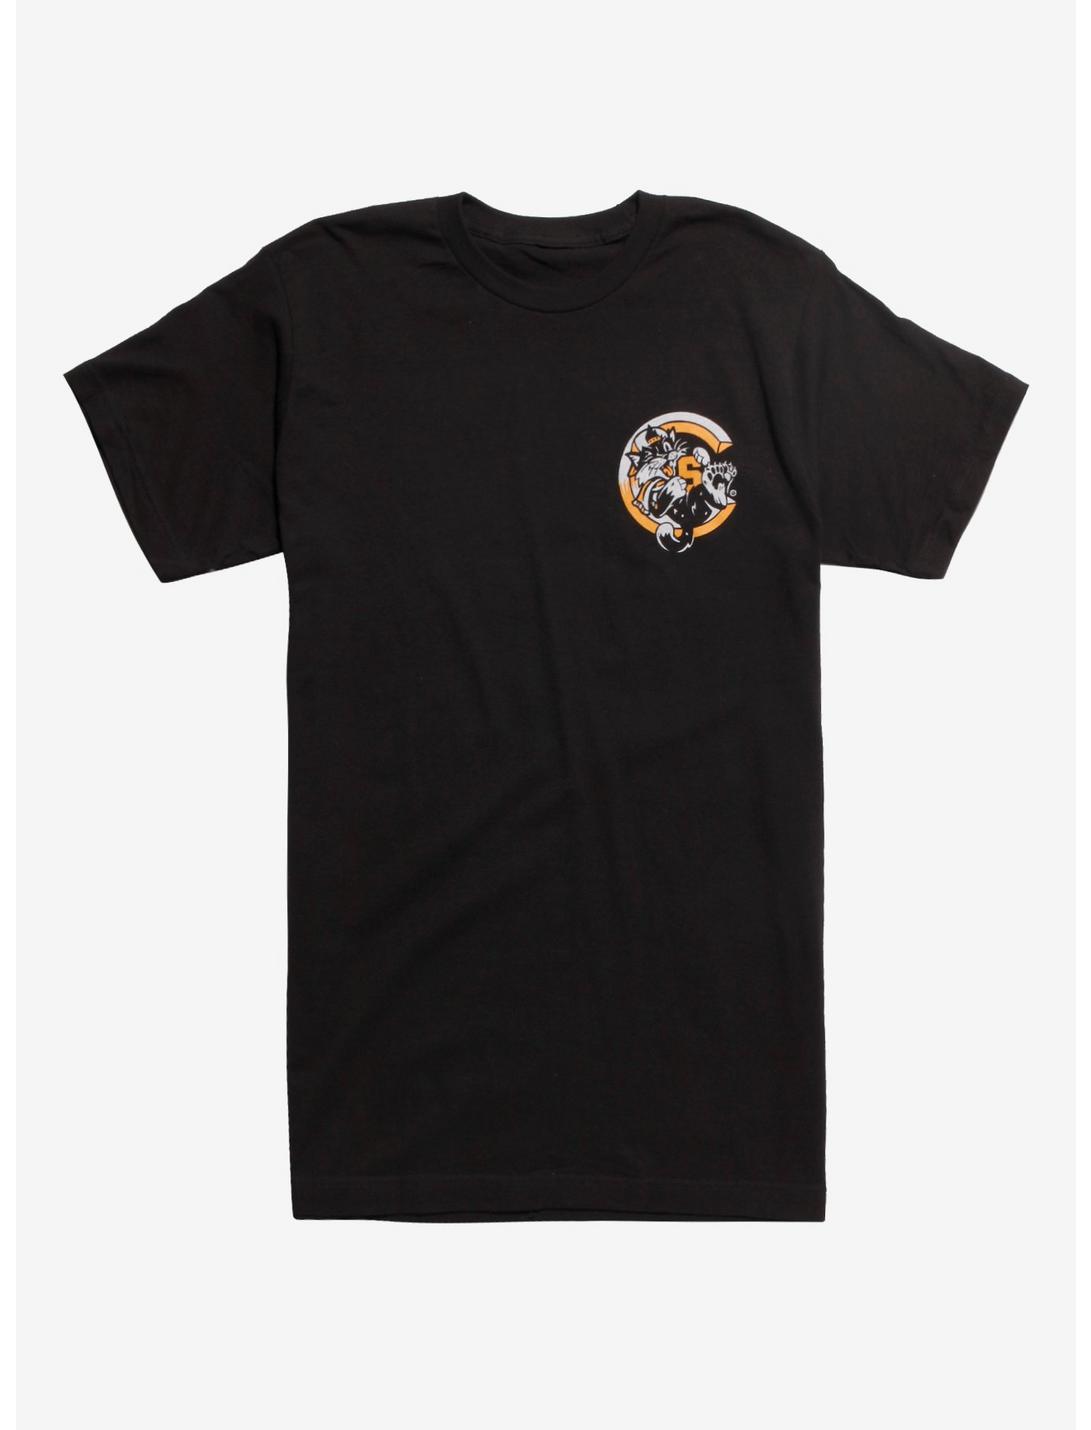 State Champs Black Cat T-Shirt | Hot Topic